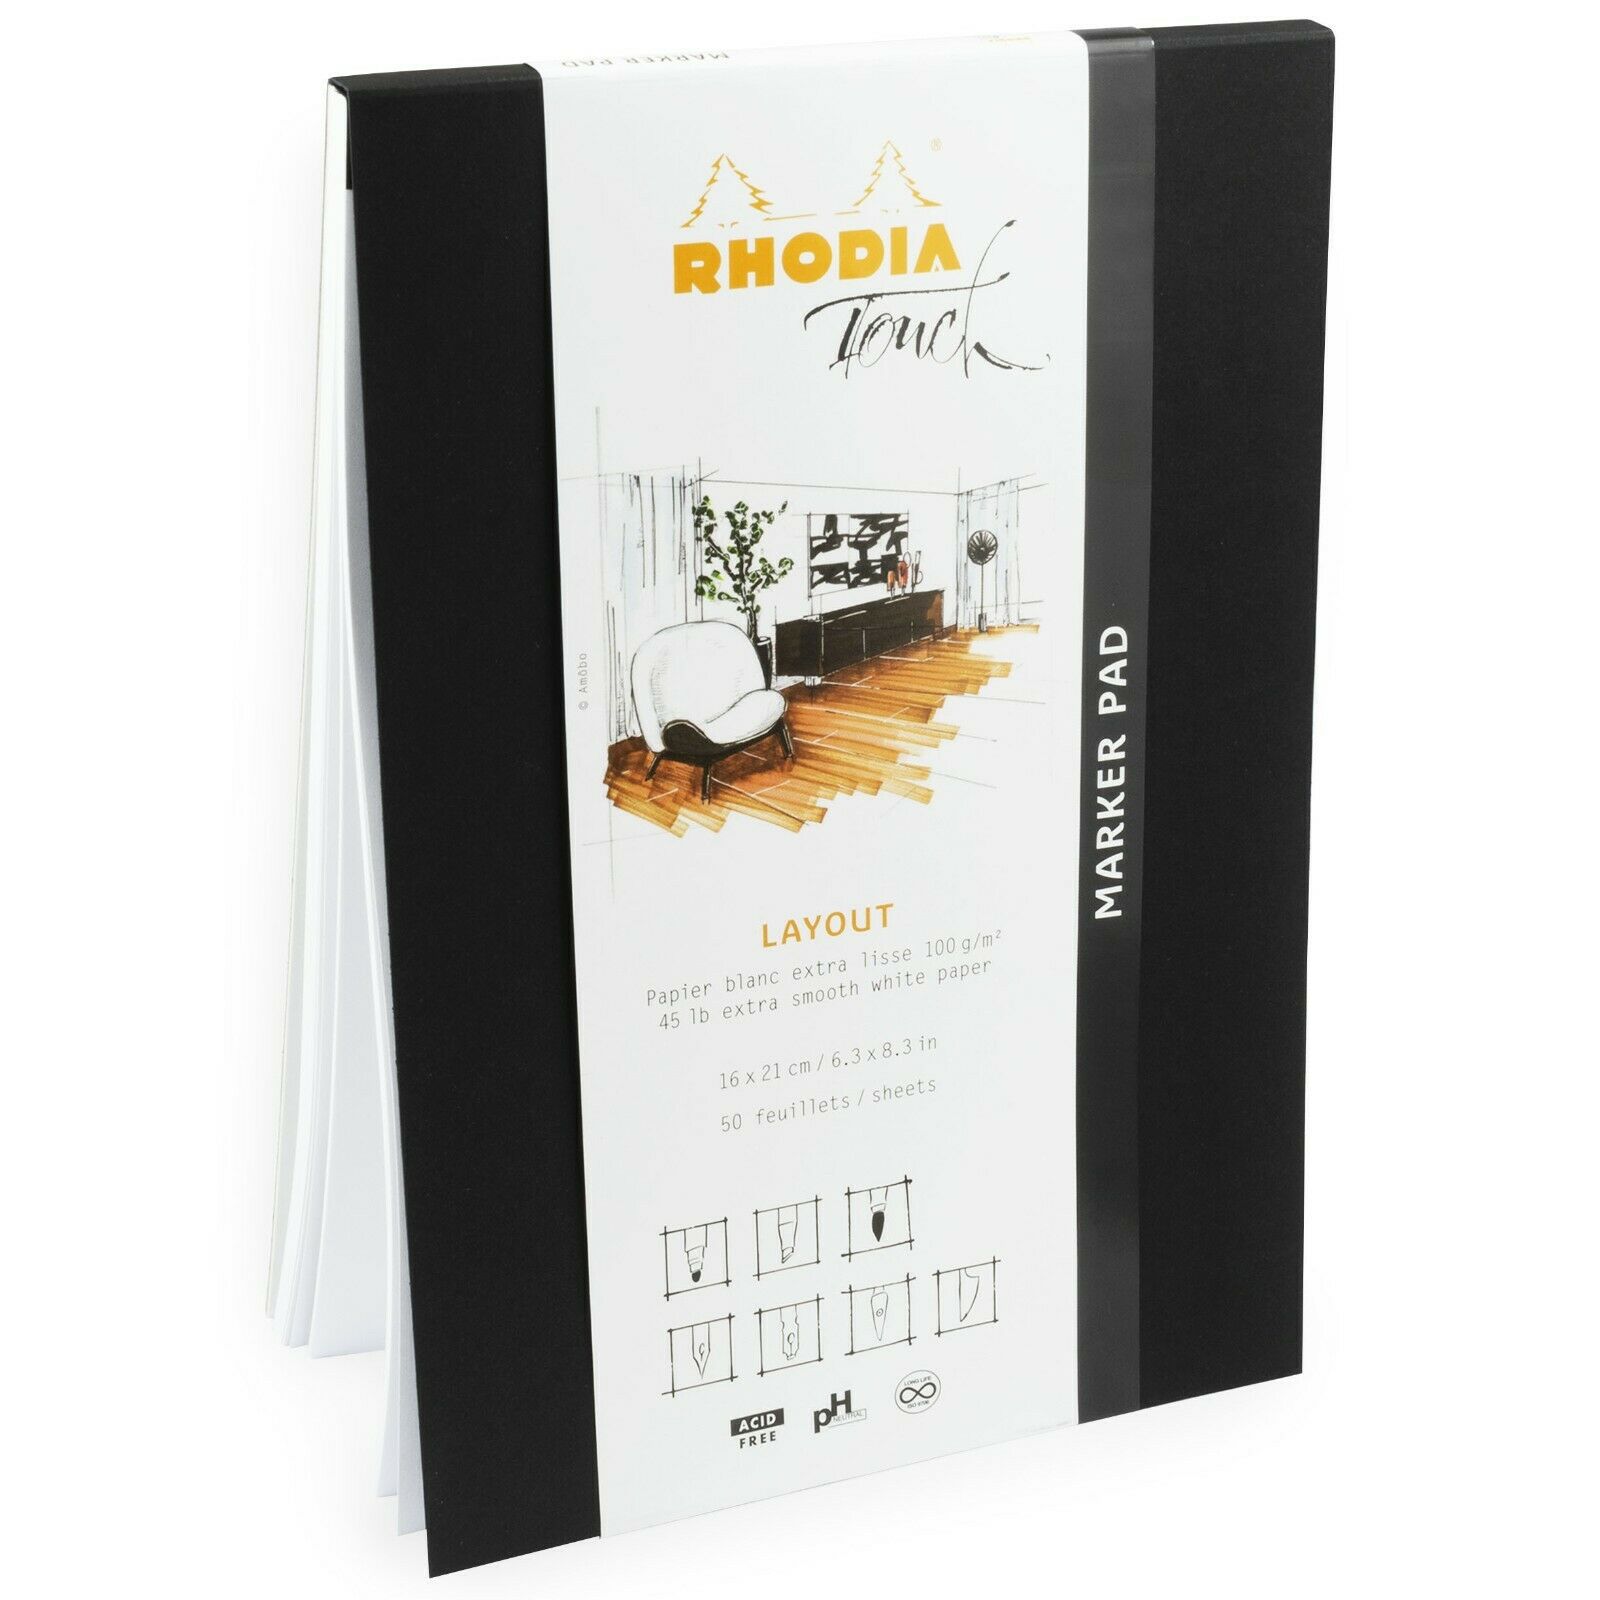 RHODIA TOUCH MARKER PAD 50F. LAYOUT 100G